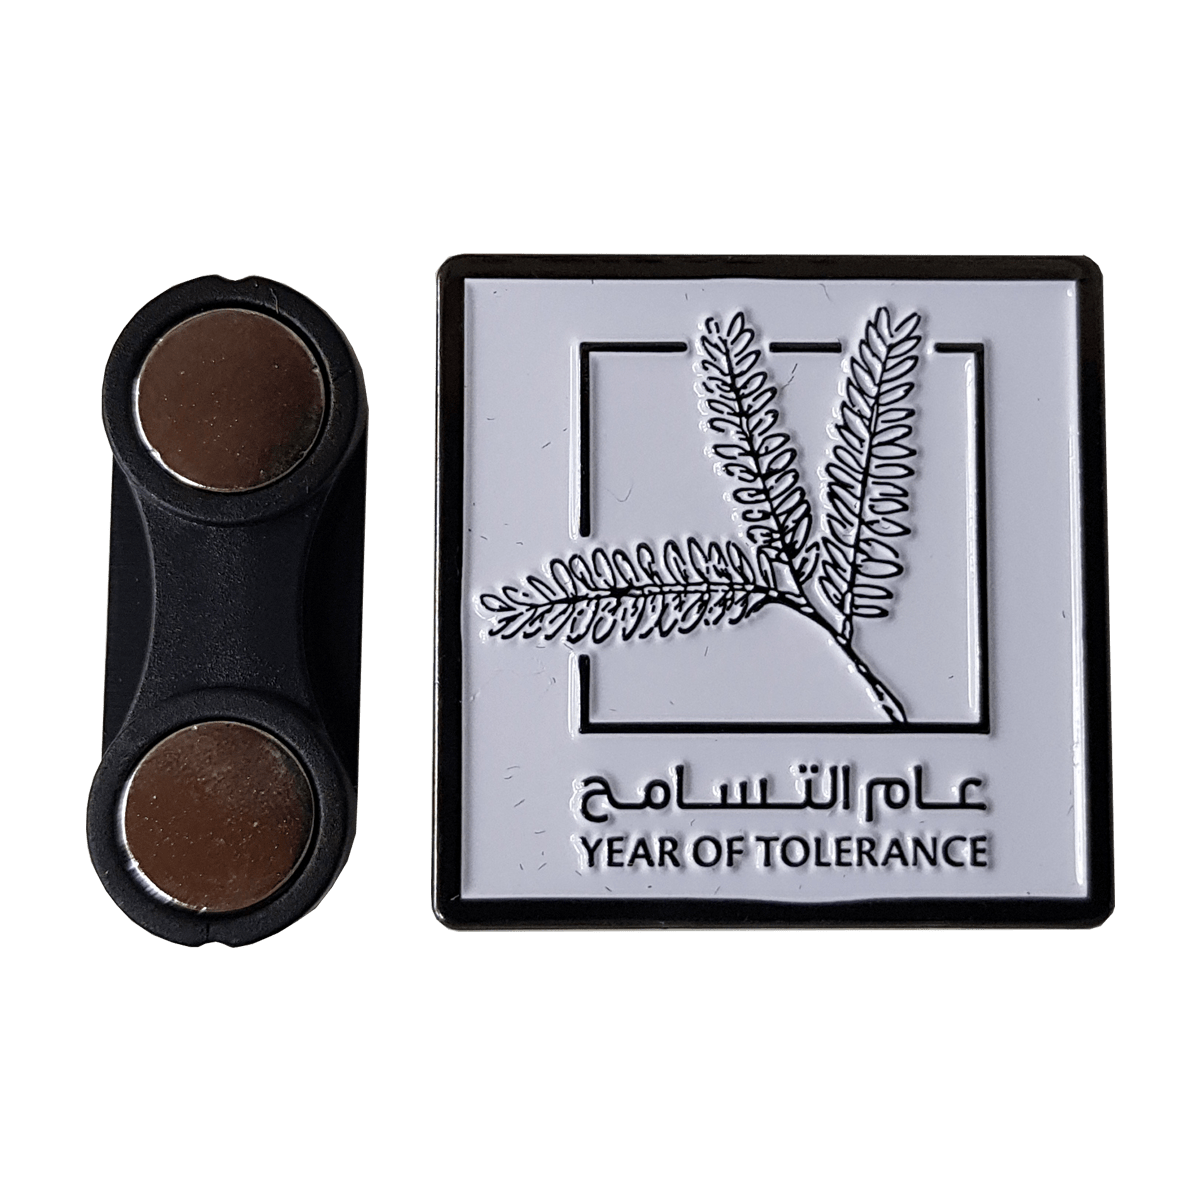 Year of Tolerance Badge with Gift Box 1 Pcs Pack (3 Branches)